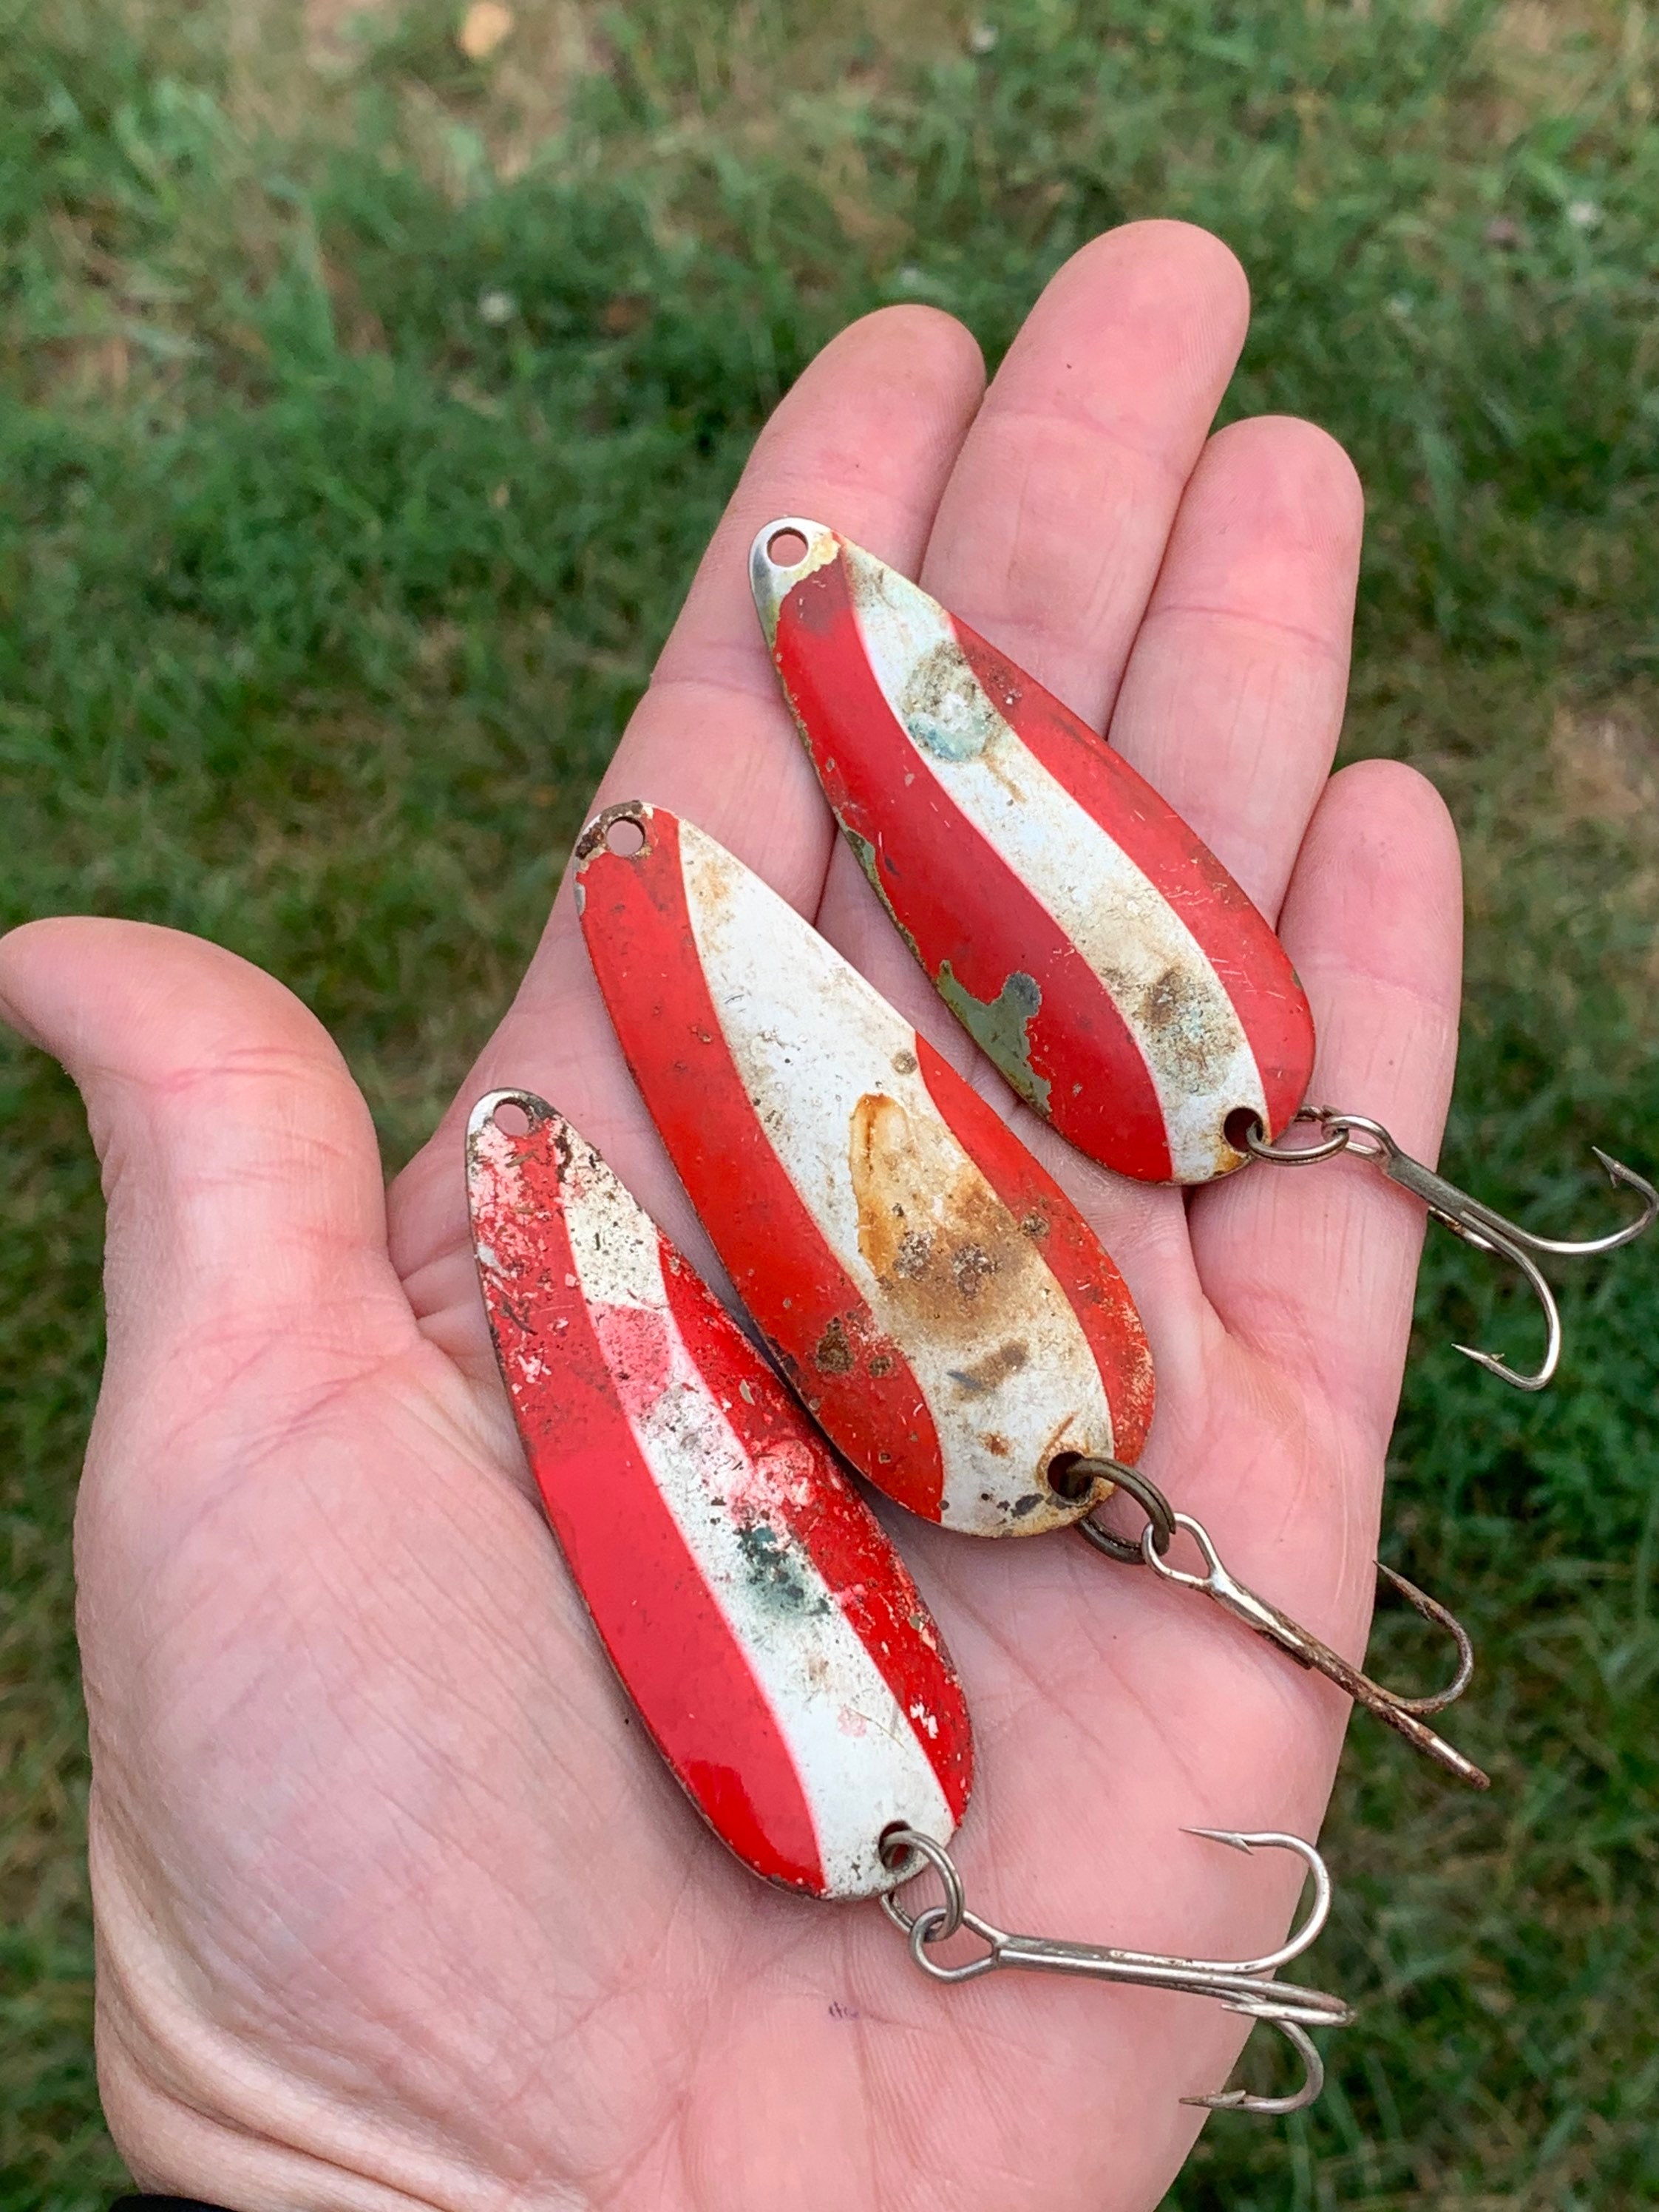 Vintage Eppinger Daredevil Bass Fishing Spoon Lure Lot Of 3 Yellow Red